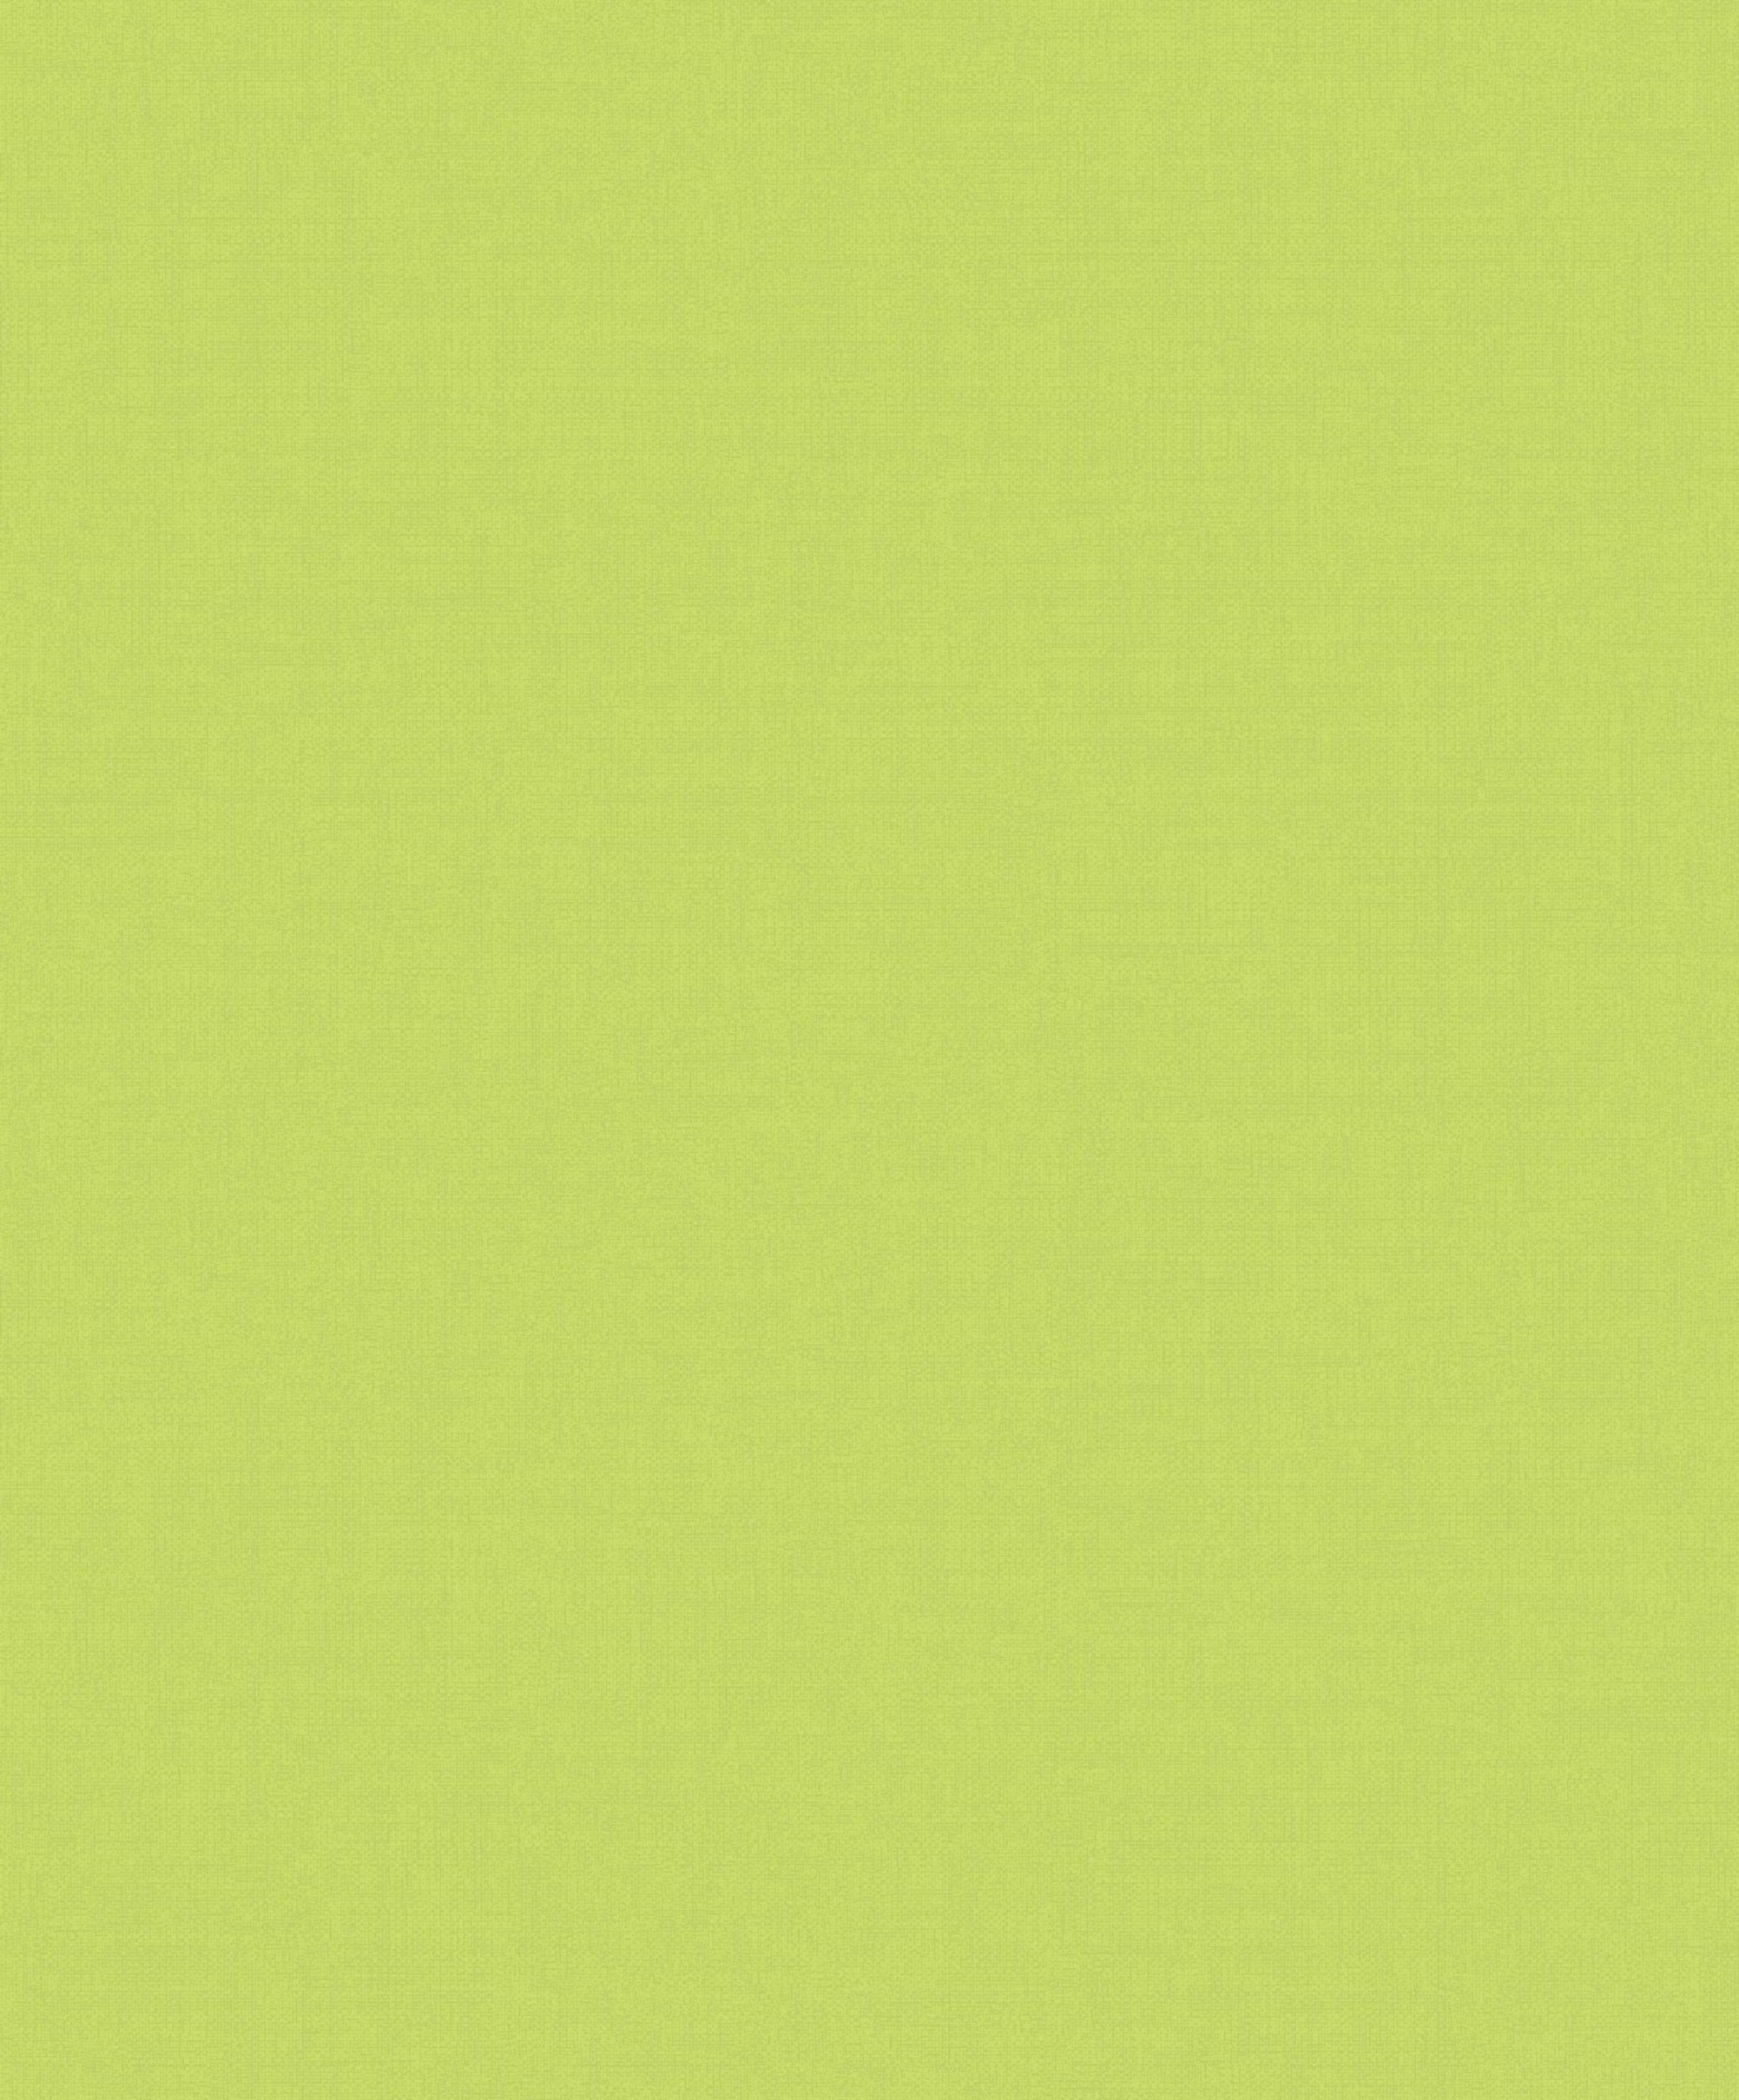 1920x2319 2880x1800 solid green background aÃÂ·a' download free awesome hd wallpapers  for